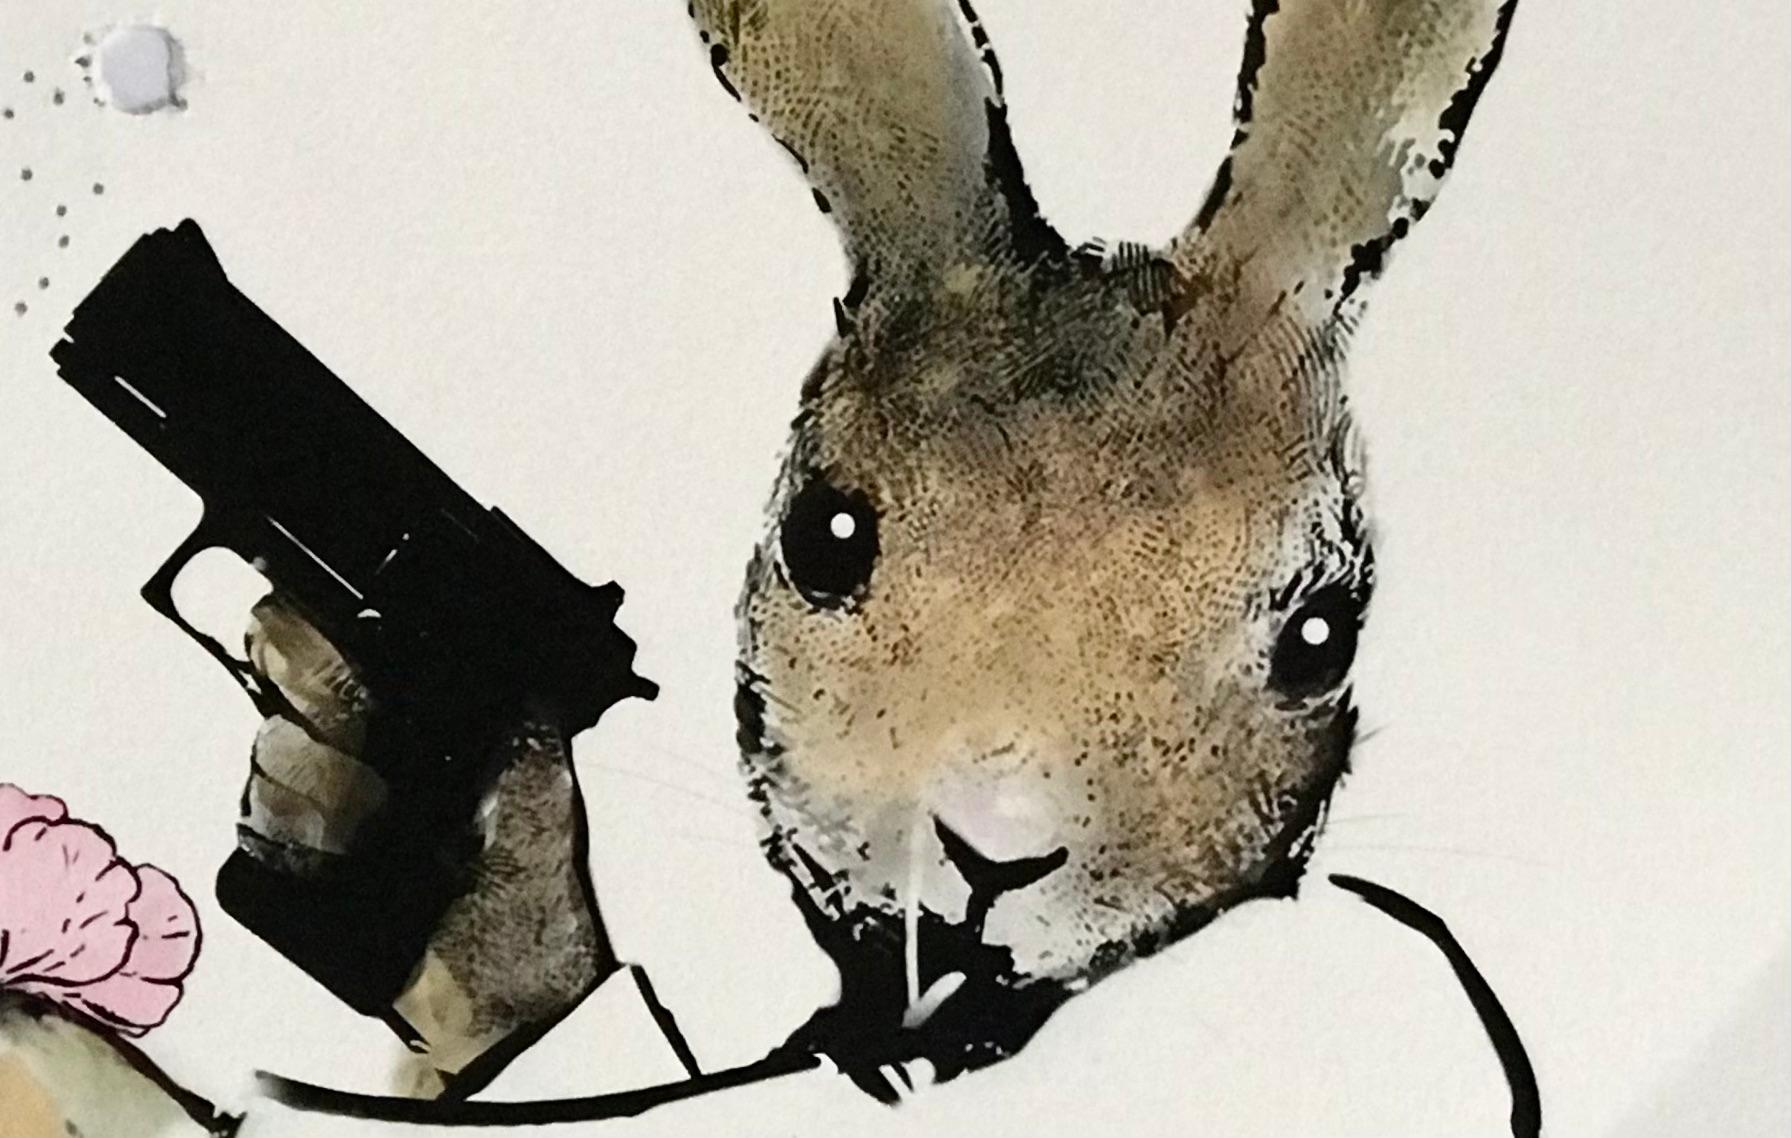 Rural Resistance Series - Home Guard by Harry bunce consists of pink and brown tones that display a bunny holding a gun and a flower with gunshots on thr sheet.

Additional information:
Mixed media (archival print with 12 bore shotgun traces) on